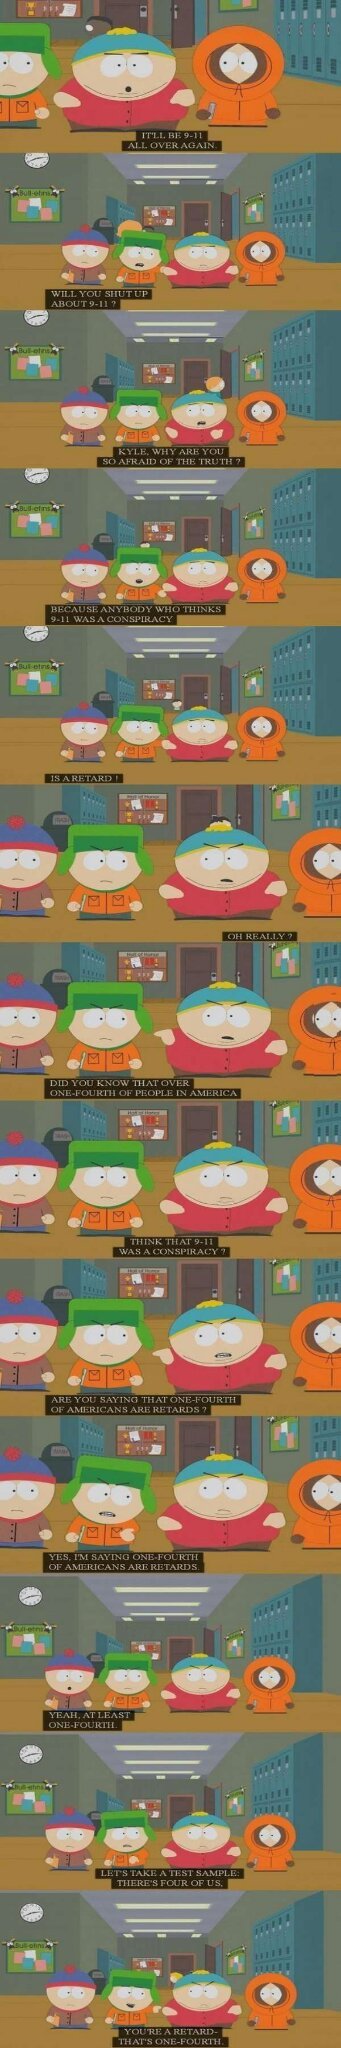 One-fourth of 'Murica according to South Park - meme